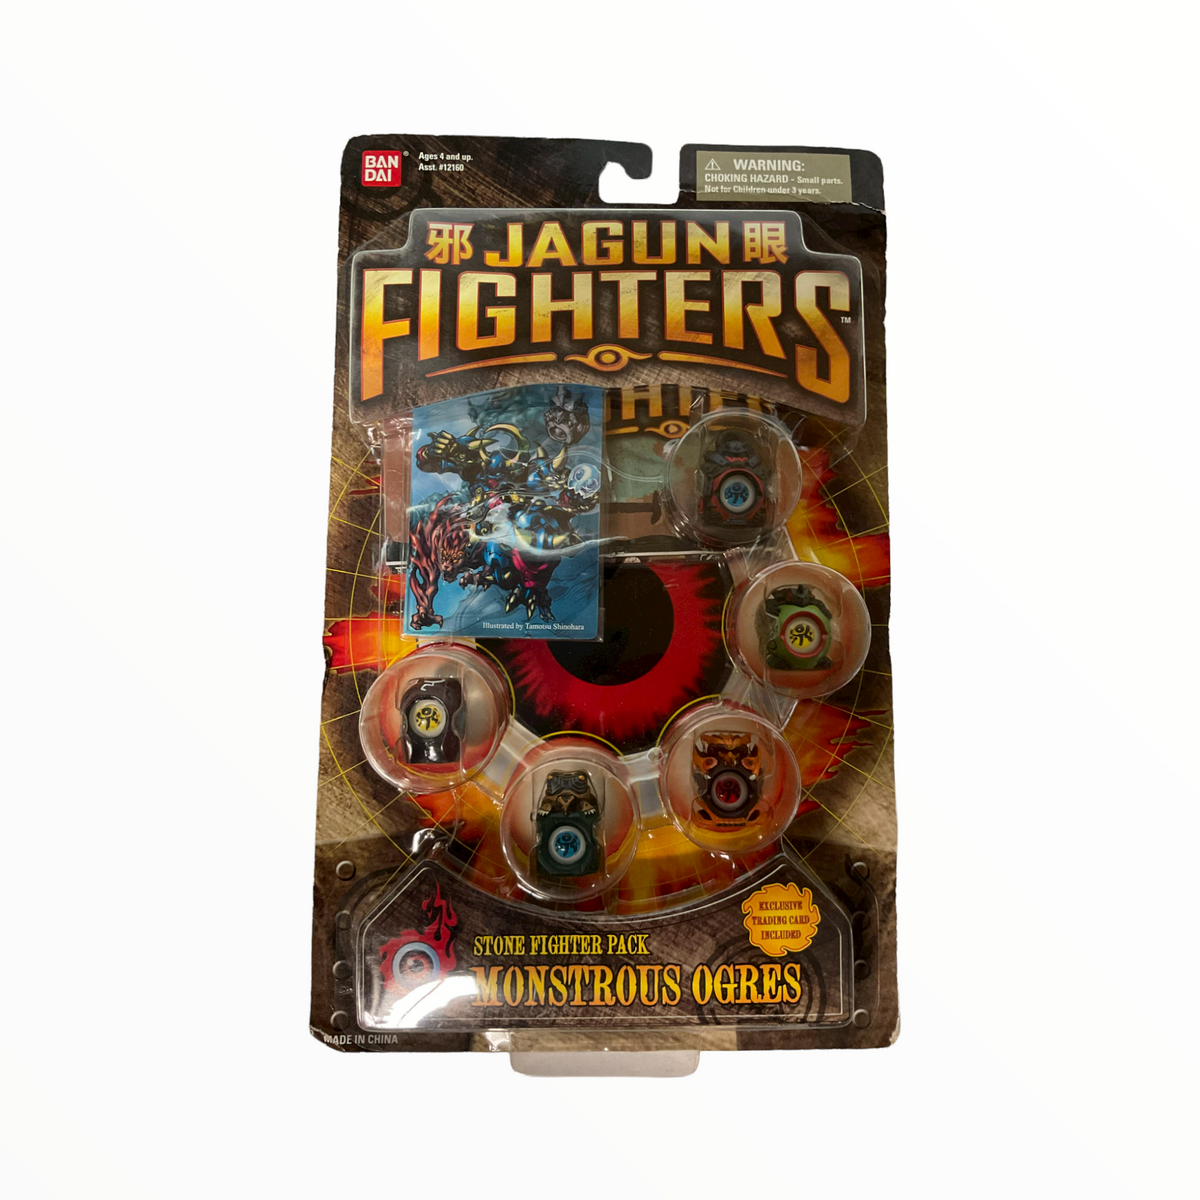 Ban Dai Jaguin Fighters Stone Fighter Pack Monstrous Ogres